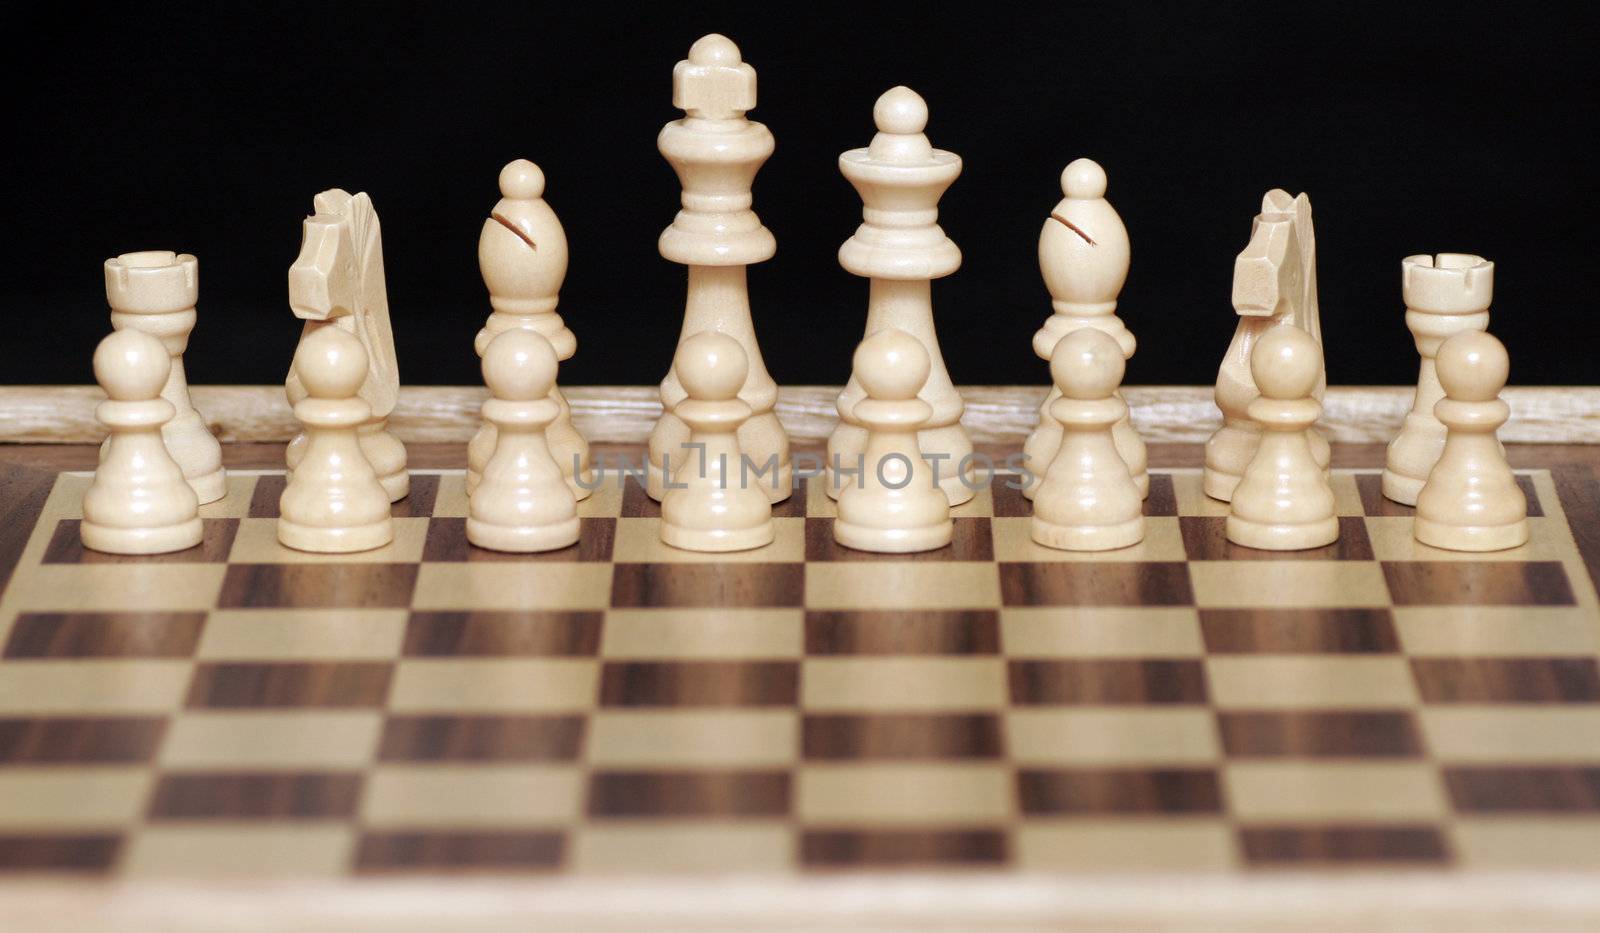 White Chess Pieces On Chessboard,Focus On Back Row